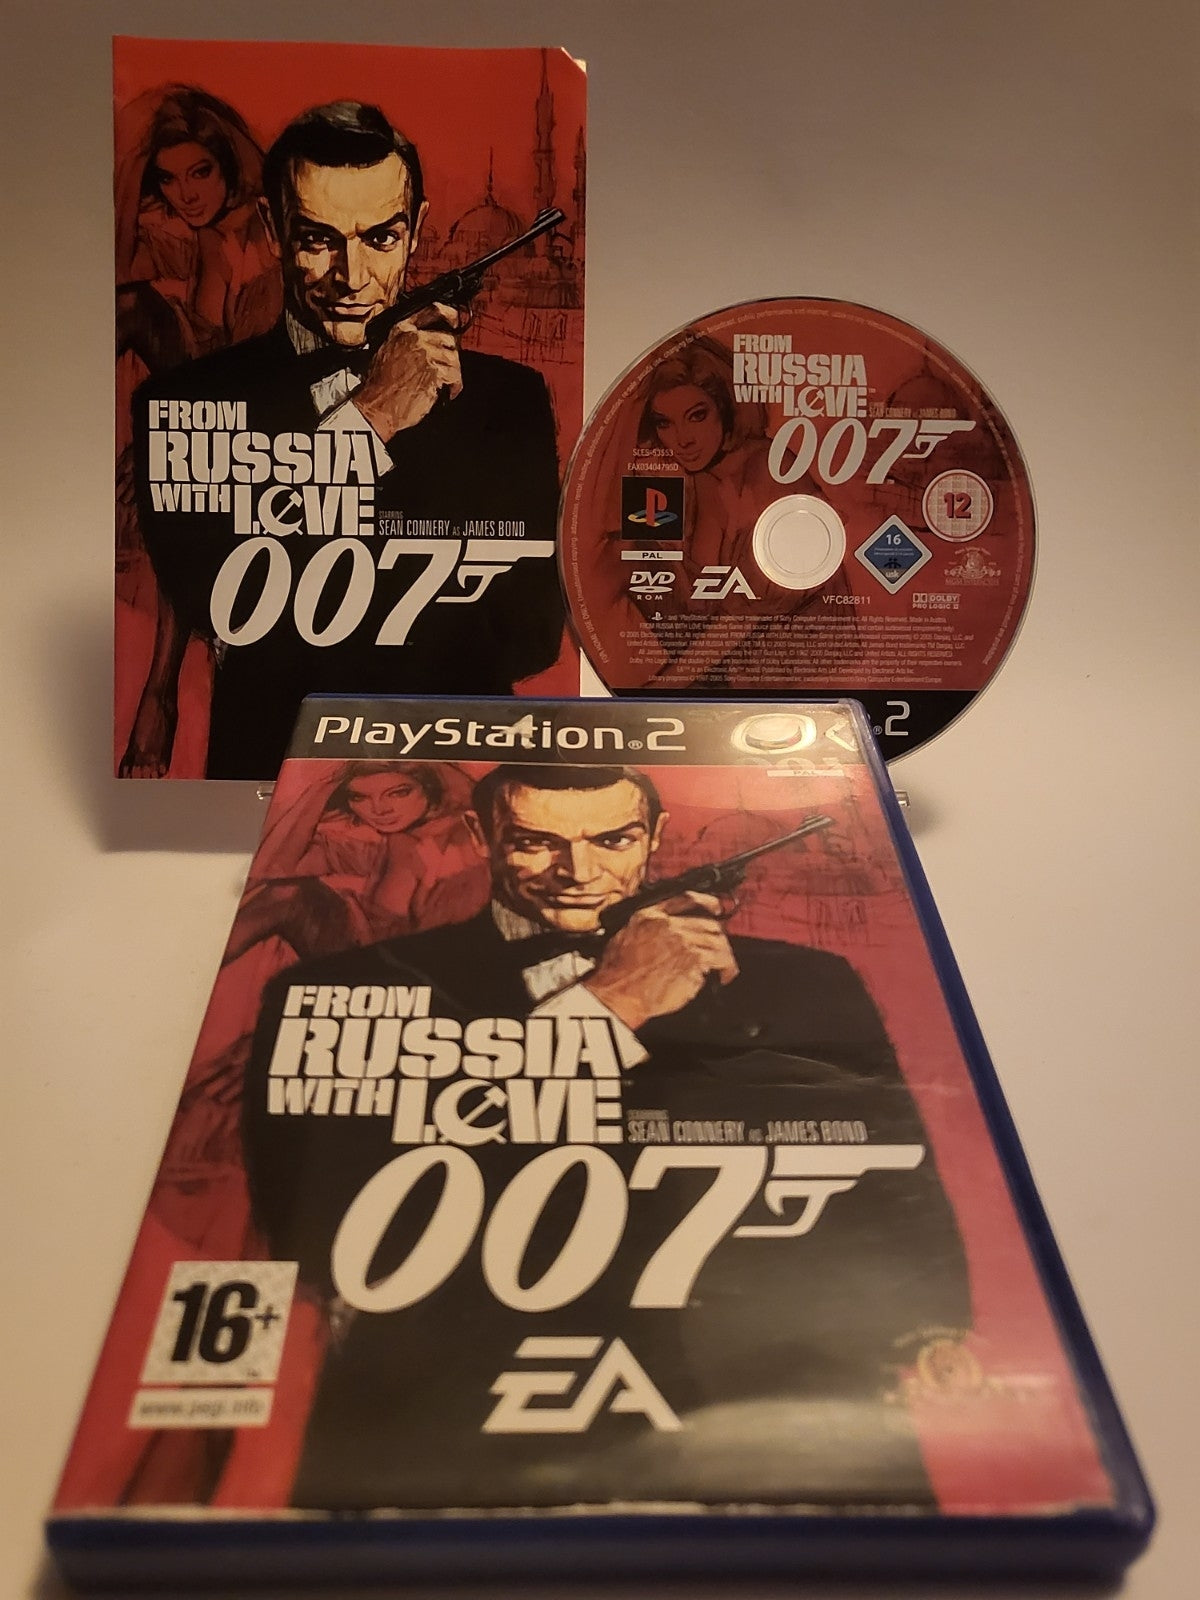 From Russia with Love 007 Playstation 2